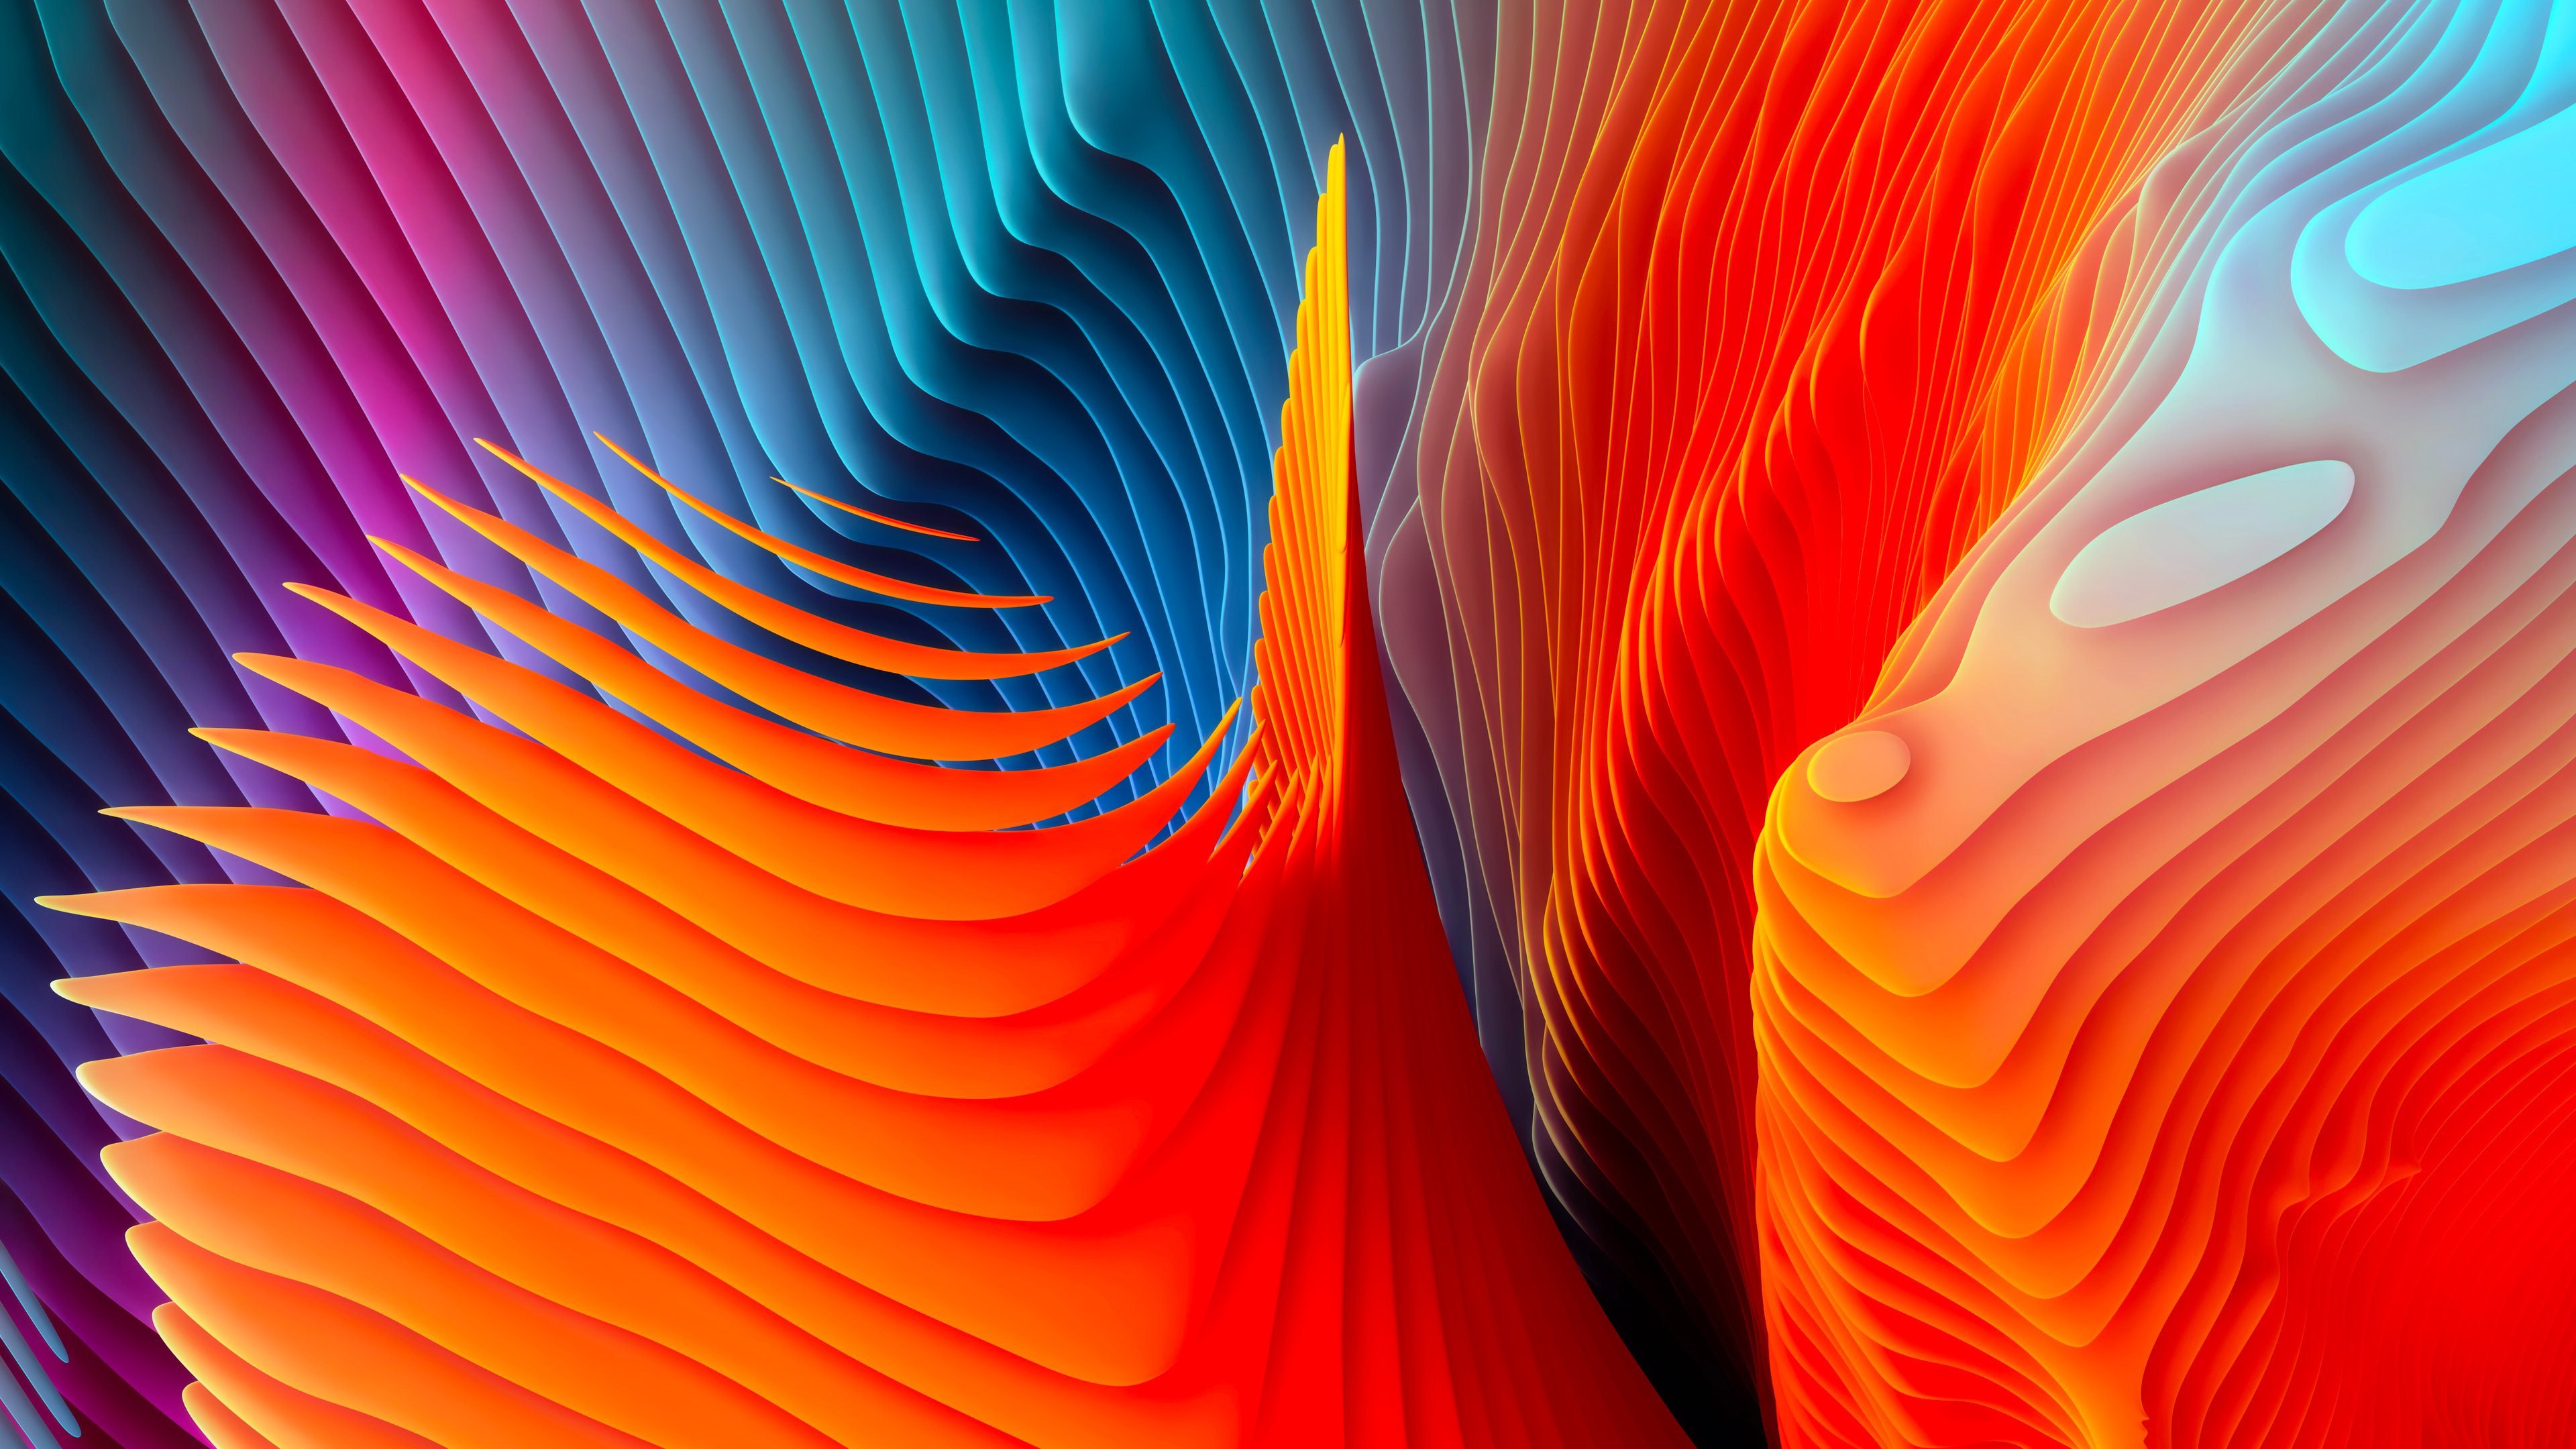 Wallpapers 4k Mac OS Sierra Abstract Shapes Wallpapers